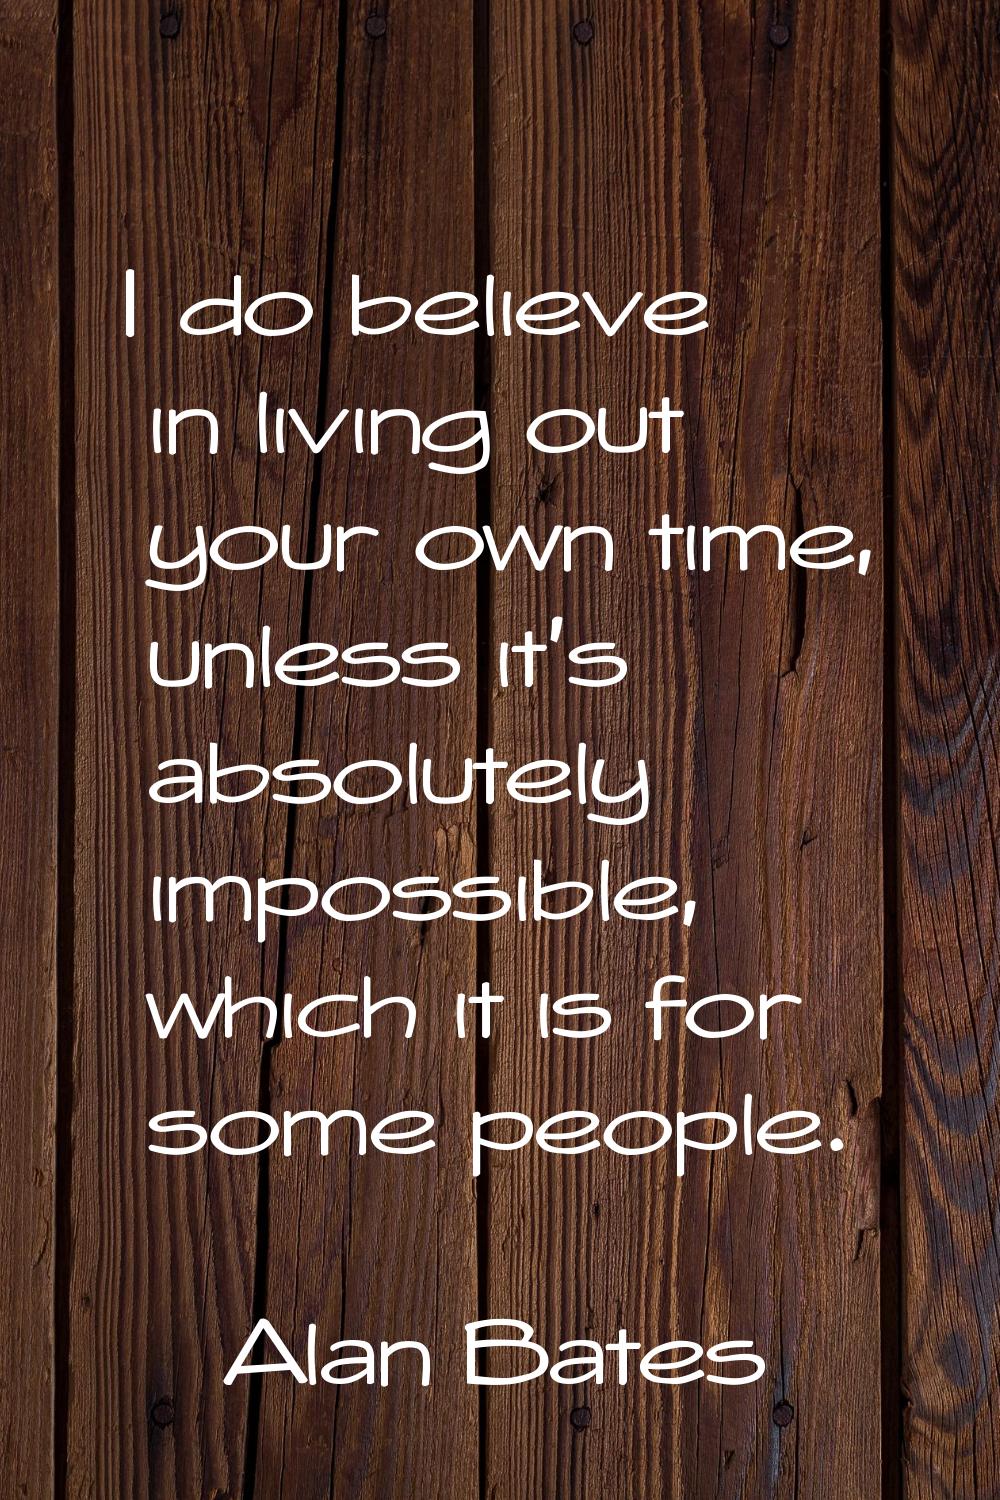 I do believe in living out your own time, unless it's absolutely impossible, which it is for some p